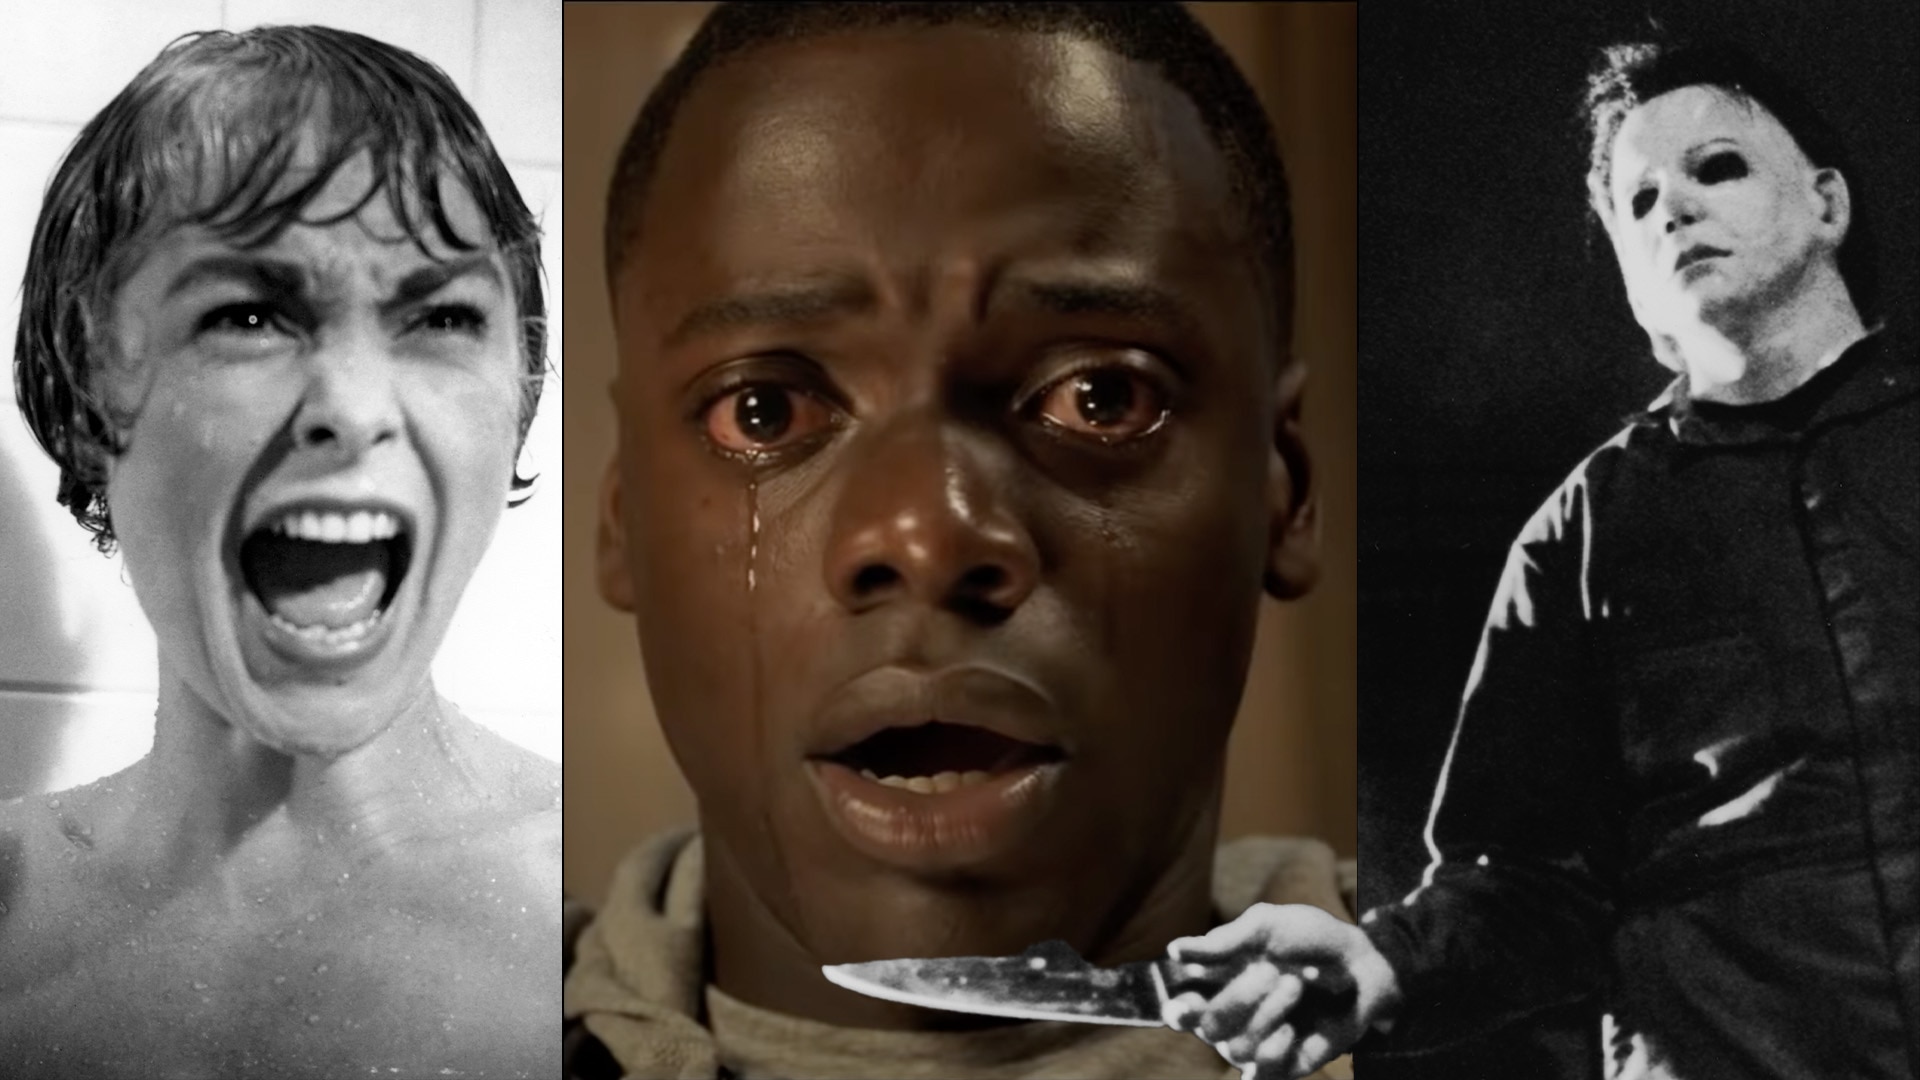 From ‘Psycho’ to ‘Scream’: The 35 most memorable kill scenes from horror movies